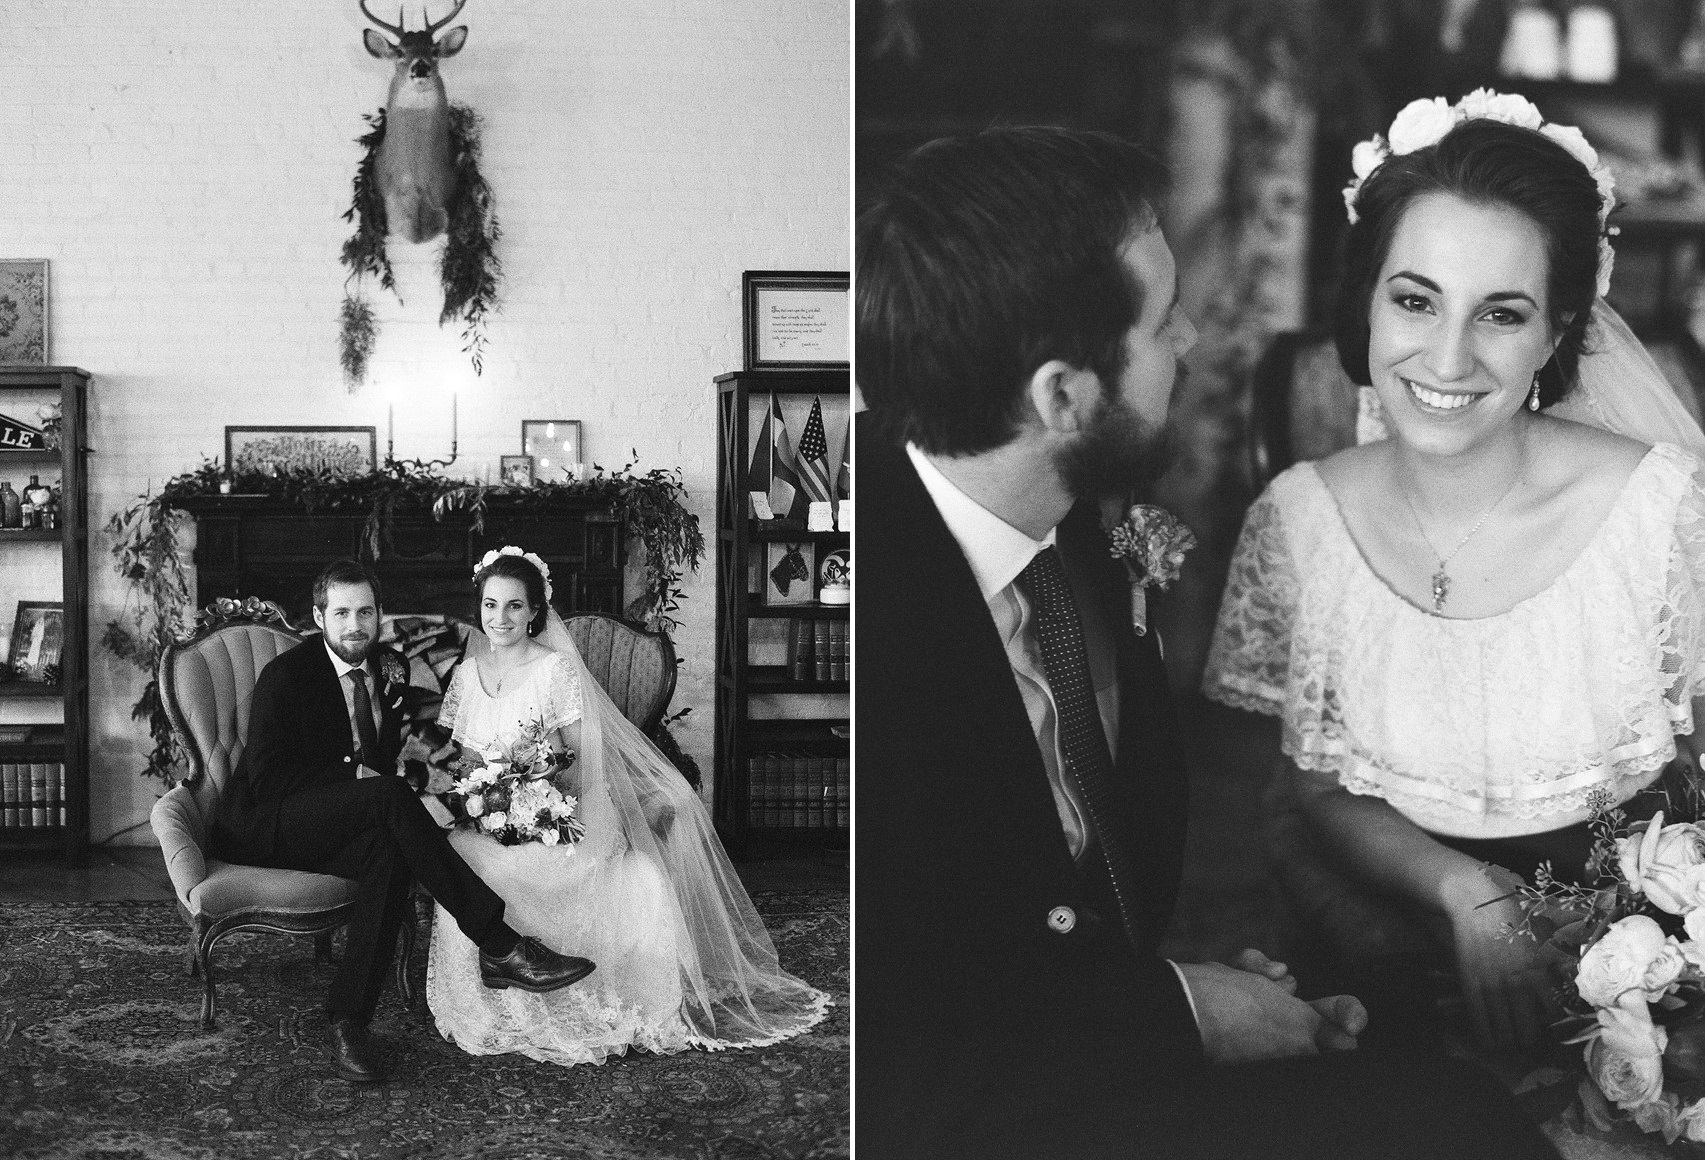 Vintage Bride & Groom Portraits // Photography ~ Whitney Neal